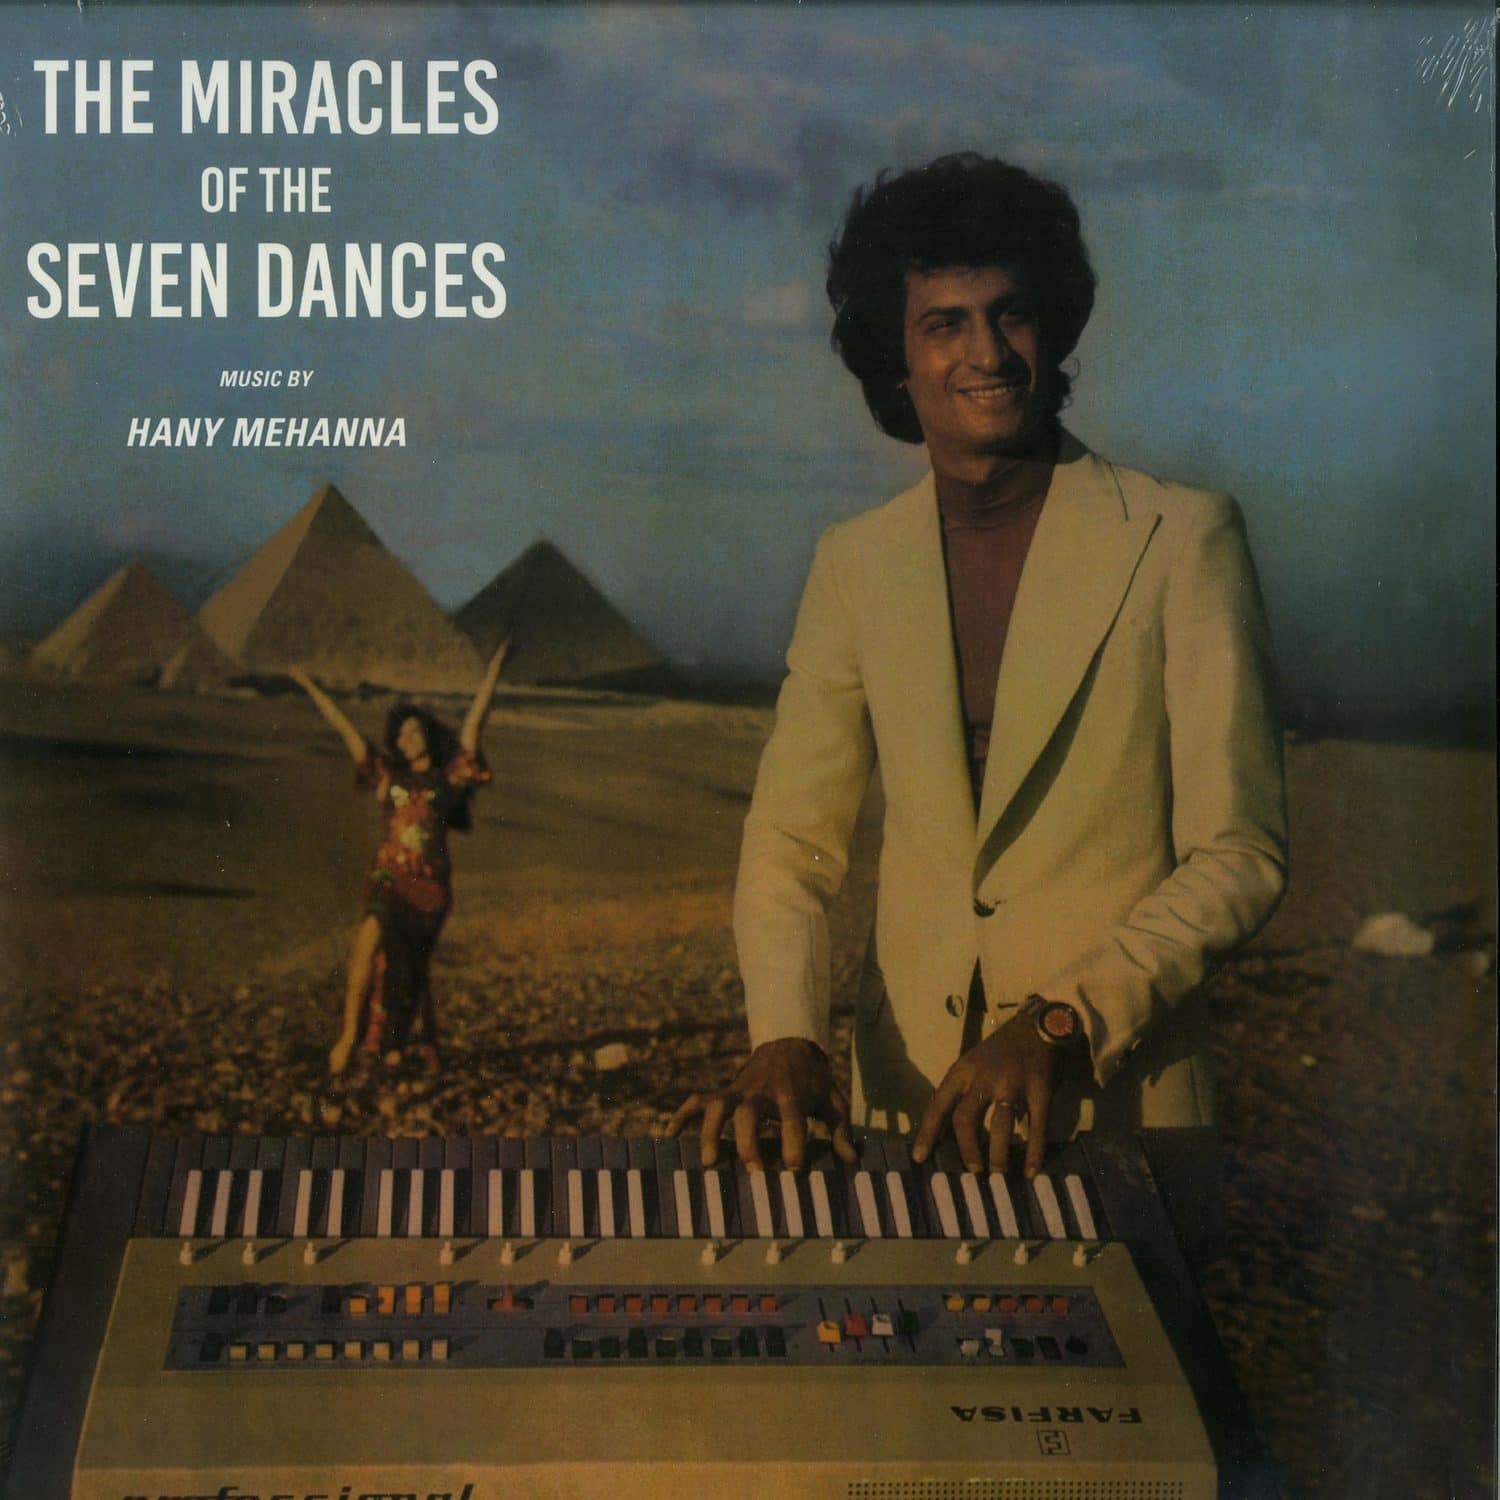 Hany Mehanna - THE MIRACLE OF THE SEVEN DANCES 